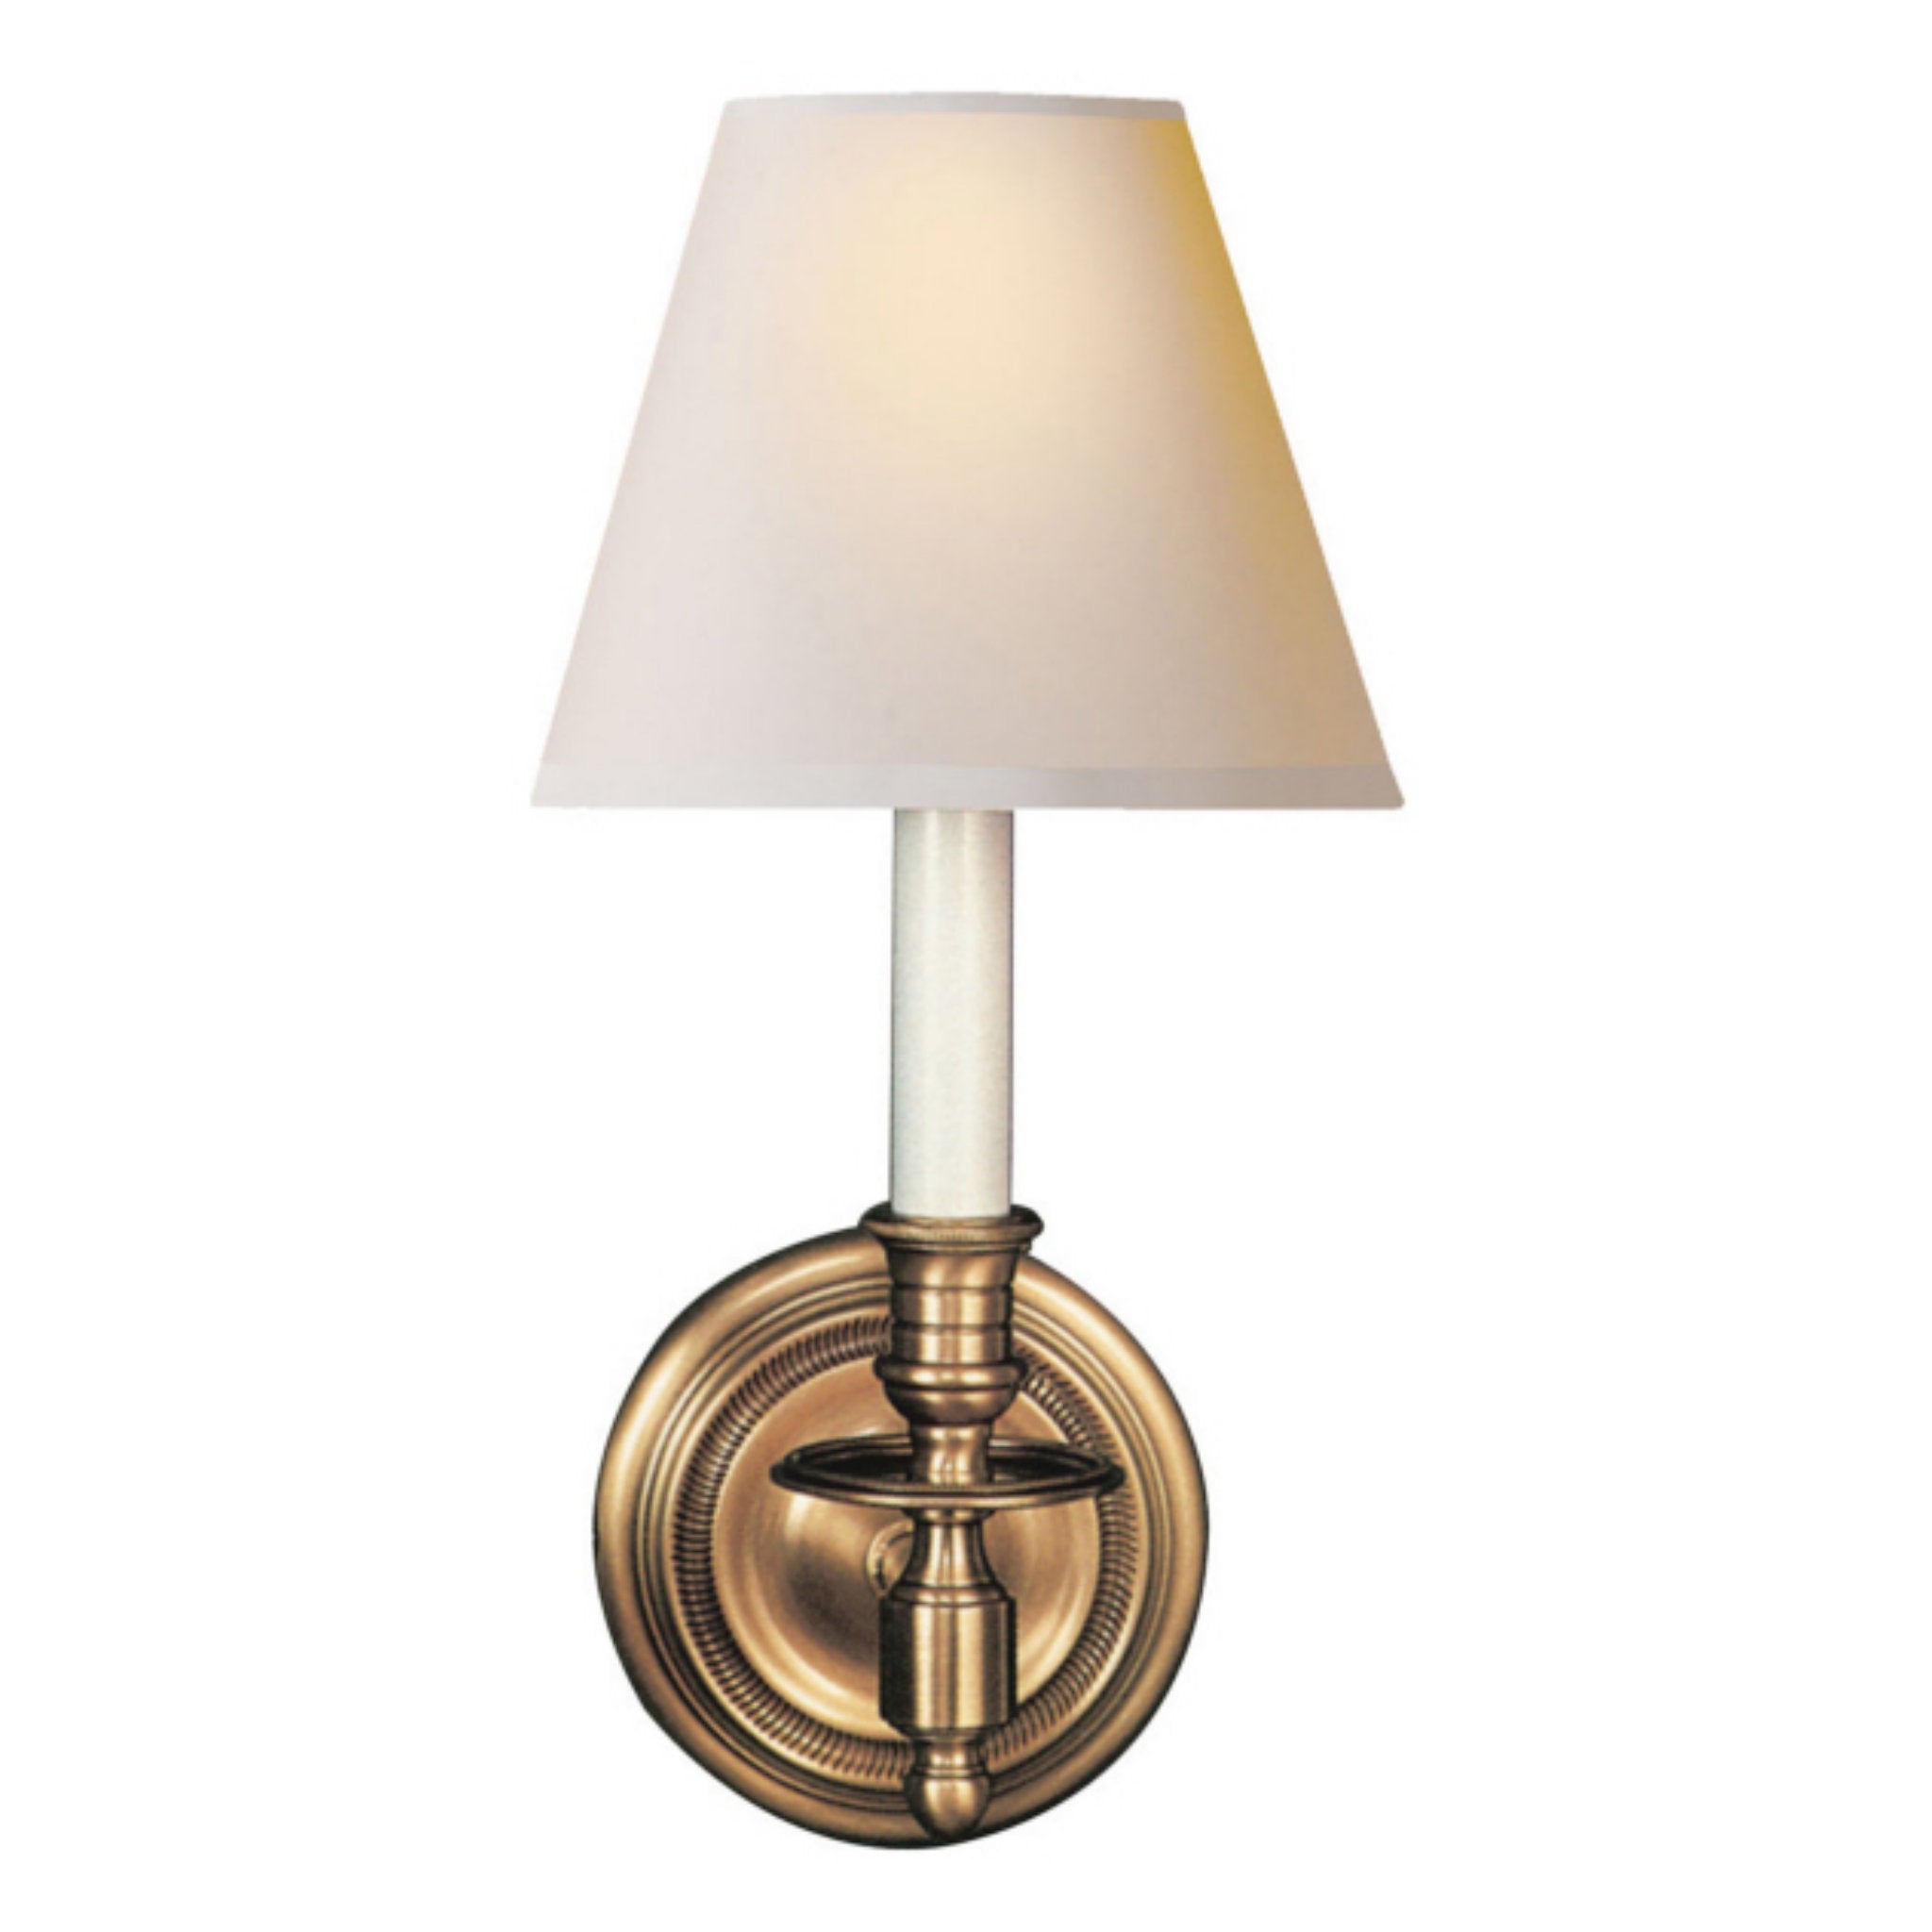 Visual Comfort Signature French Single Sconce in Hand-Rubbed Antique Brass  with Natural Paper Shade